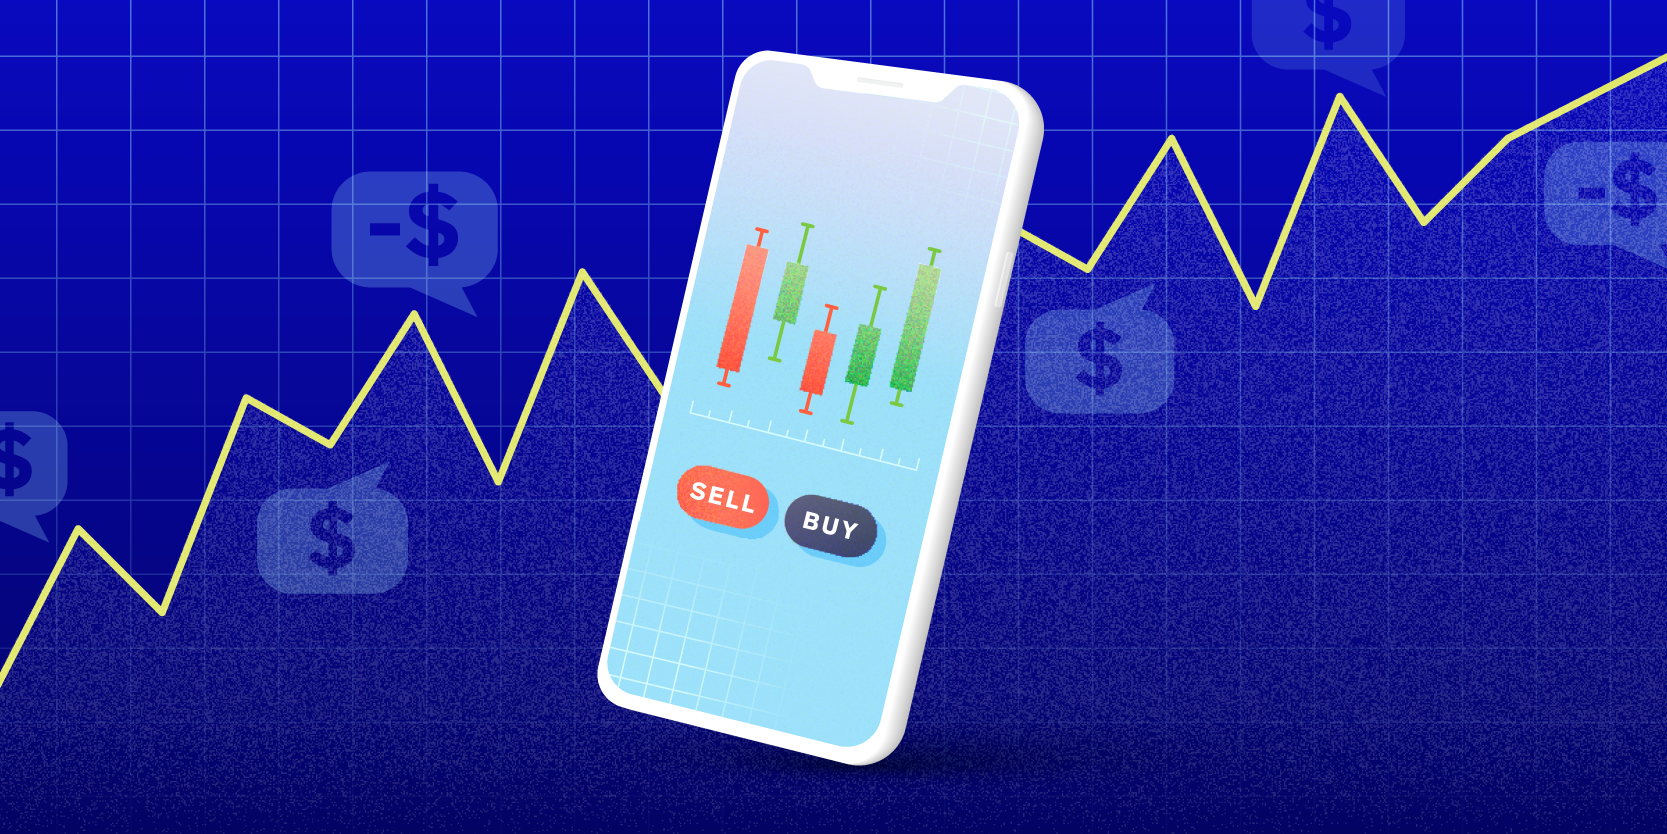 Investing Basics: How to buy stocks featuring a phone with stock candlestick charts and buy/sell buttons